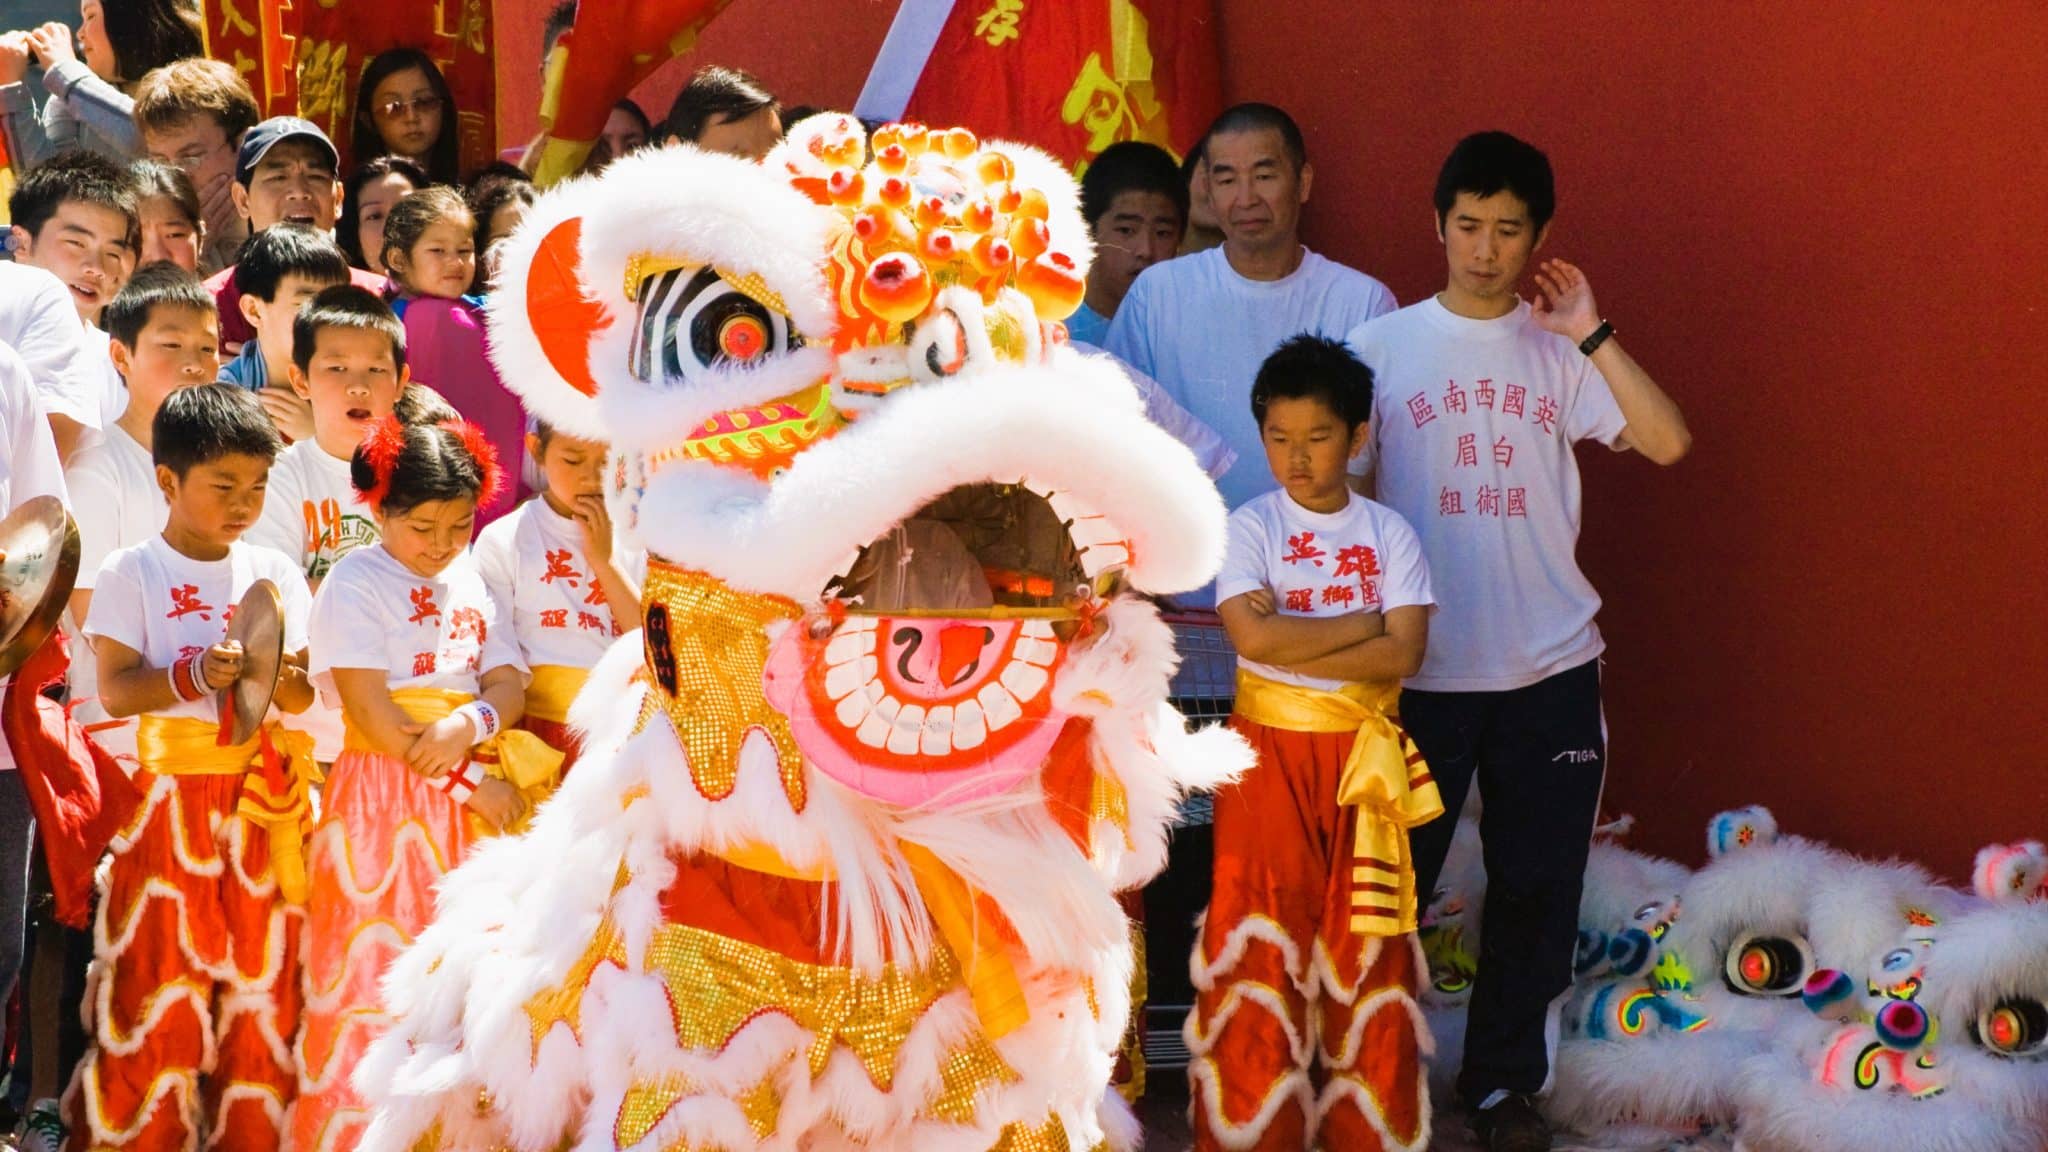 The performance of the Chinese Lion Dance during Chinese New Year